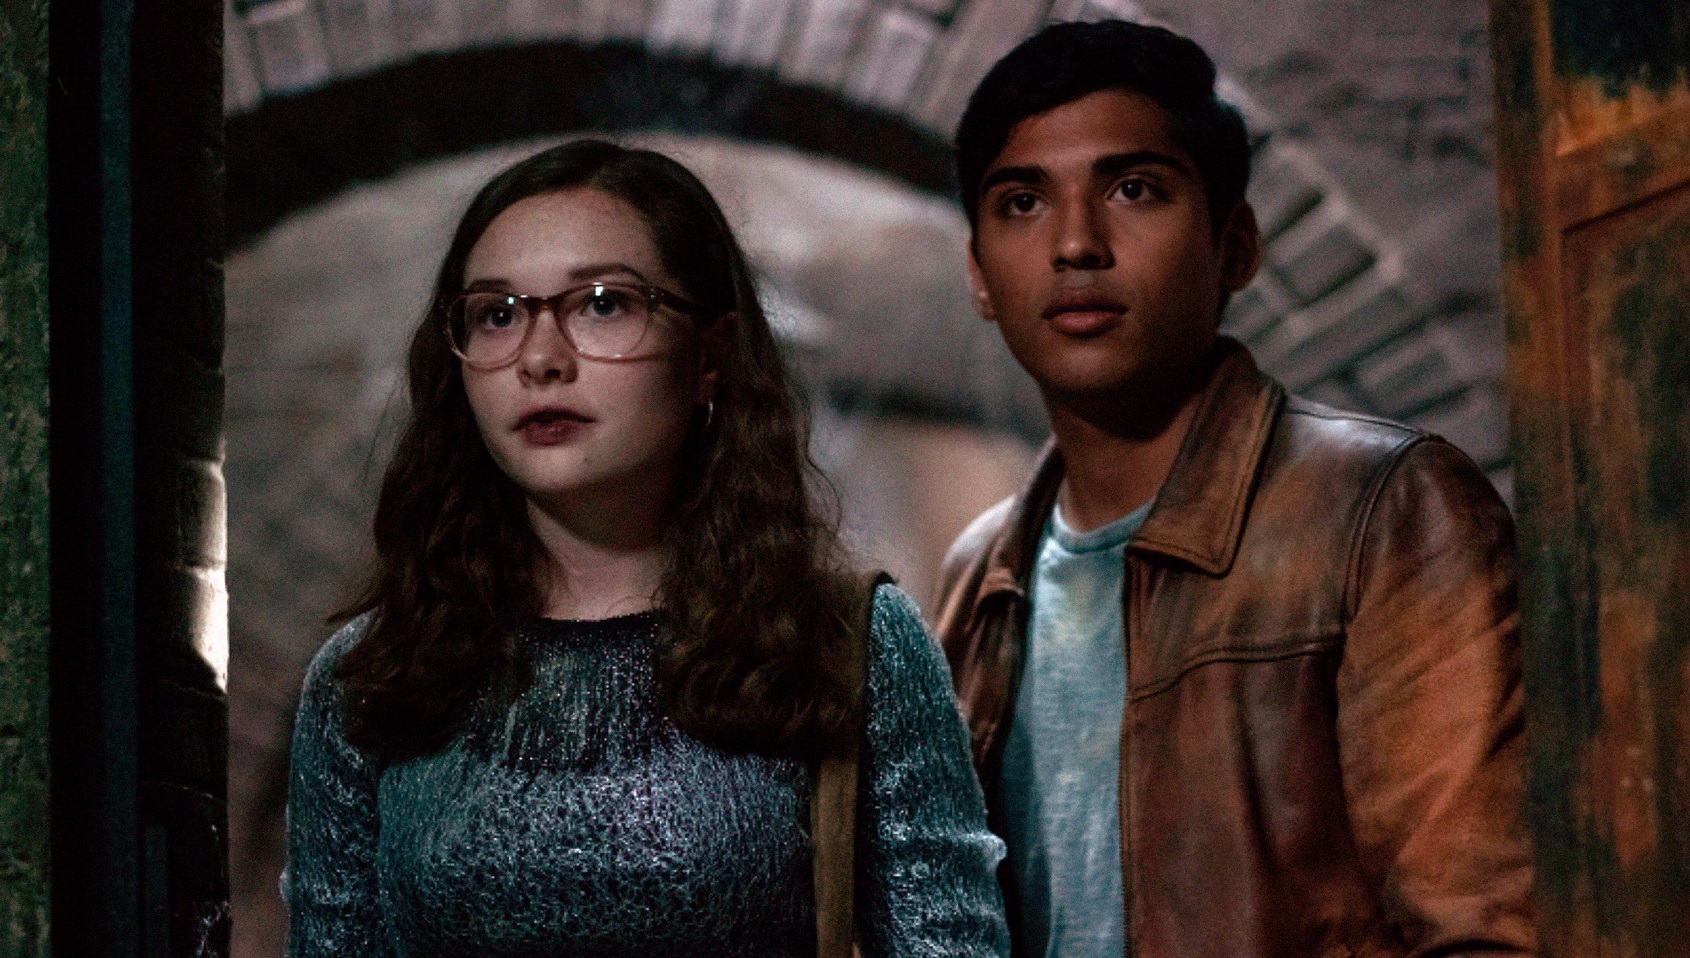 Stella (Zoe Colletti) and Ramon (Michael Garza) in Scary Stories to Tell in the Dark